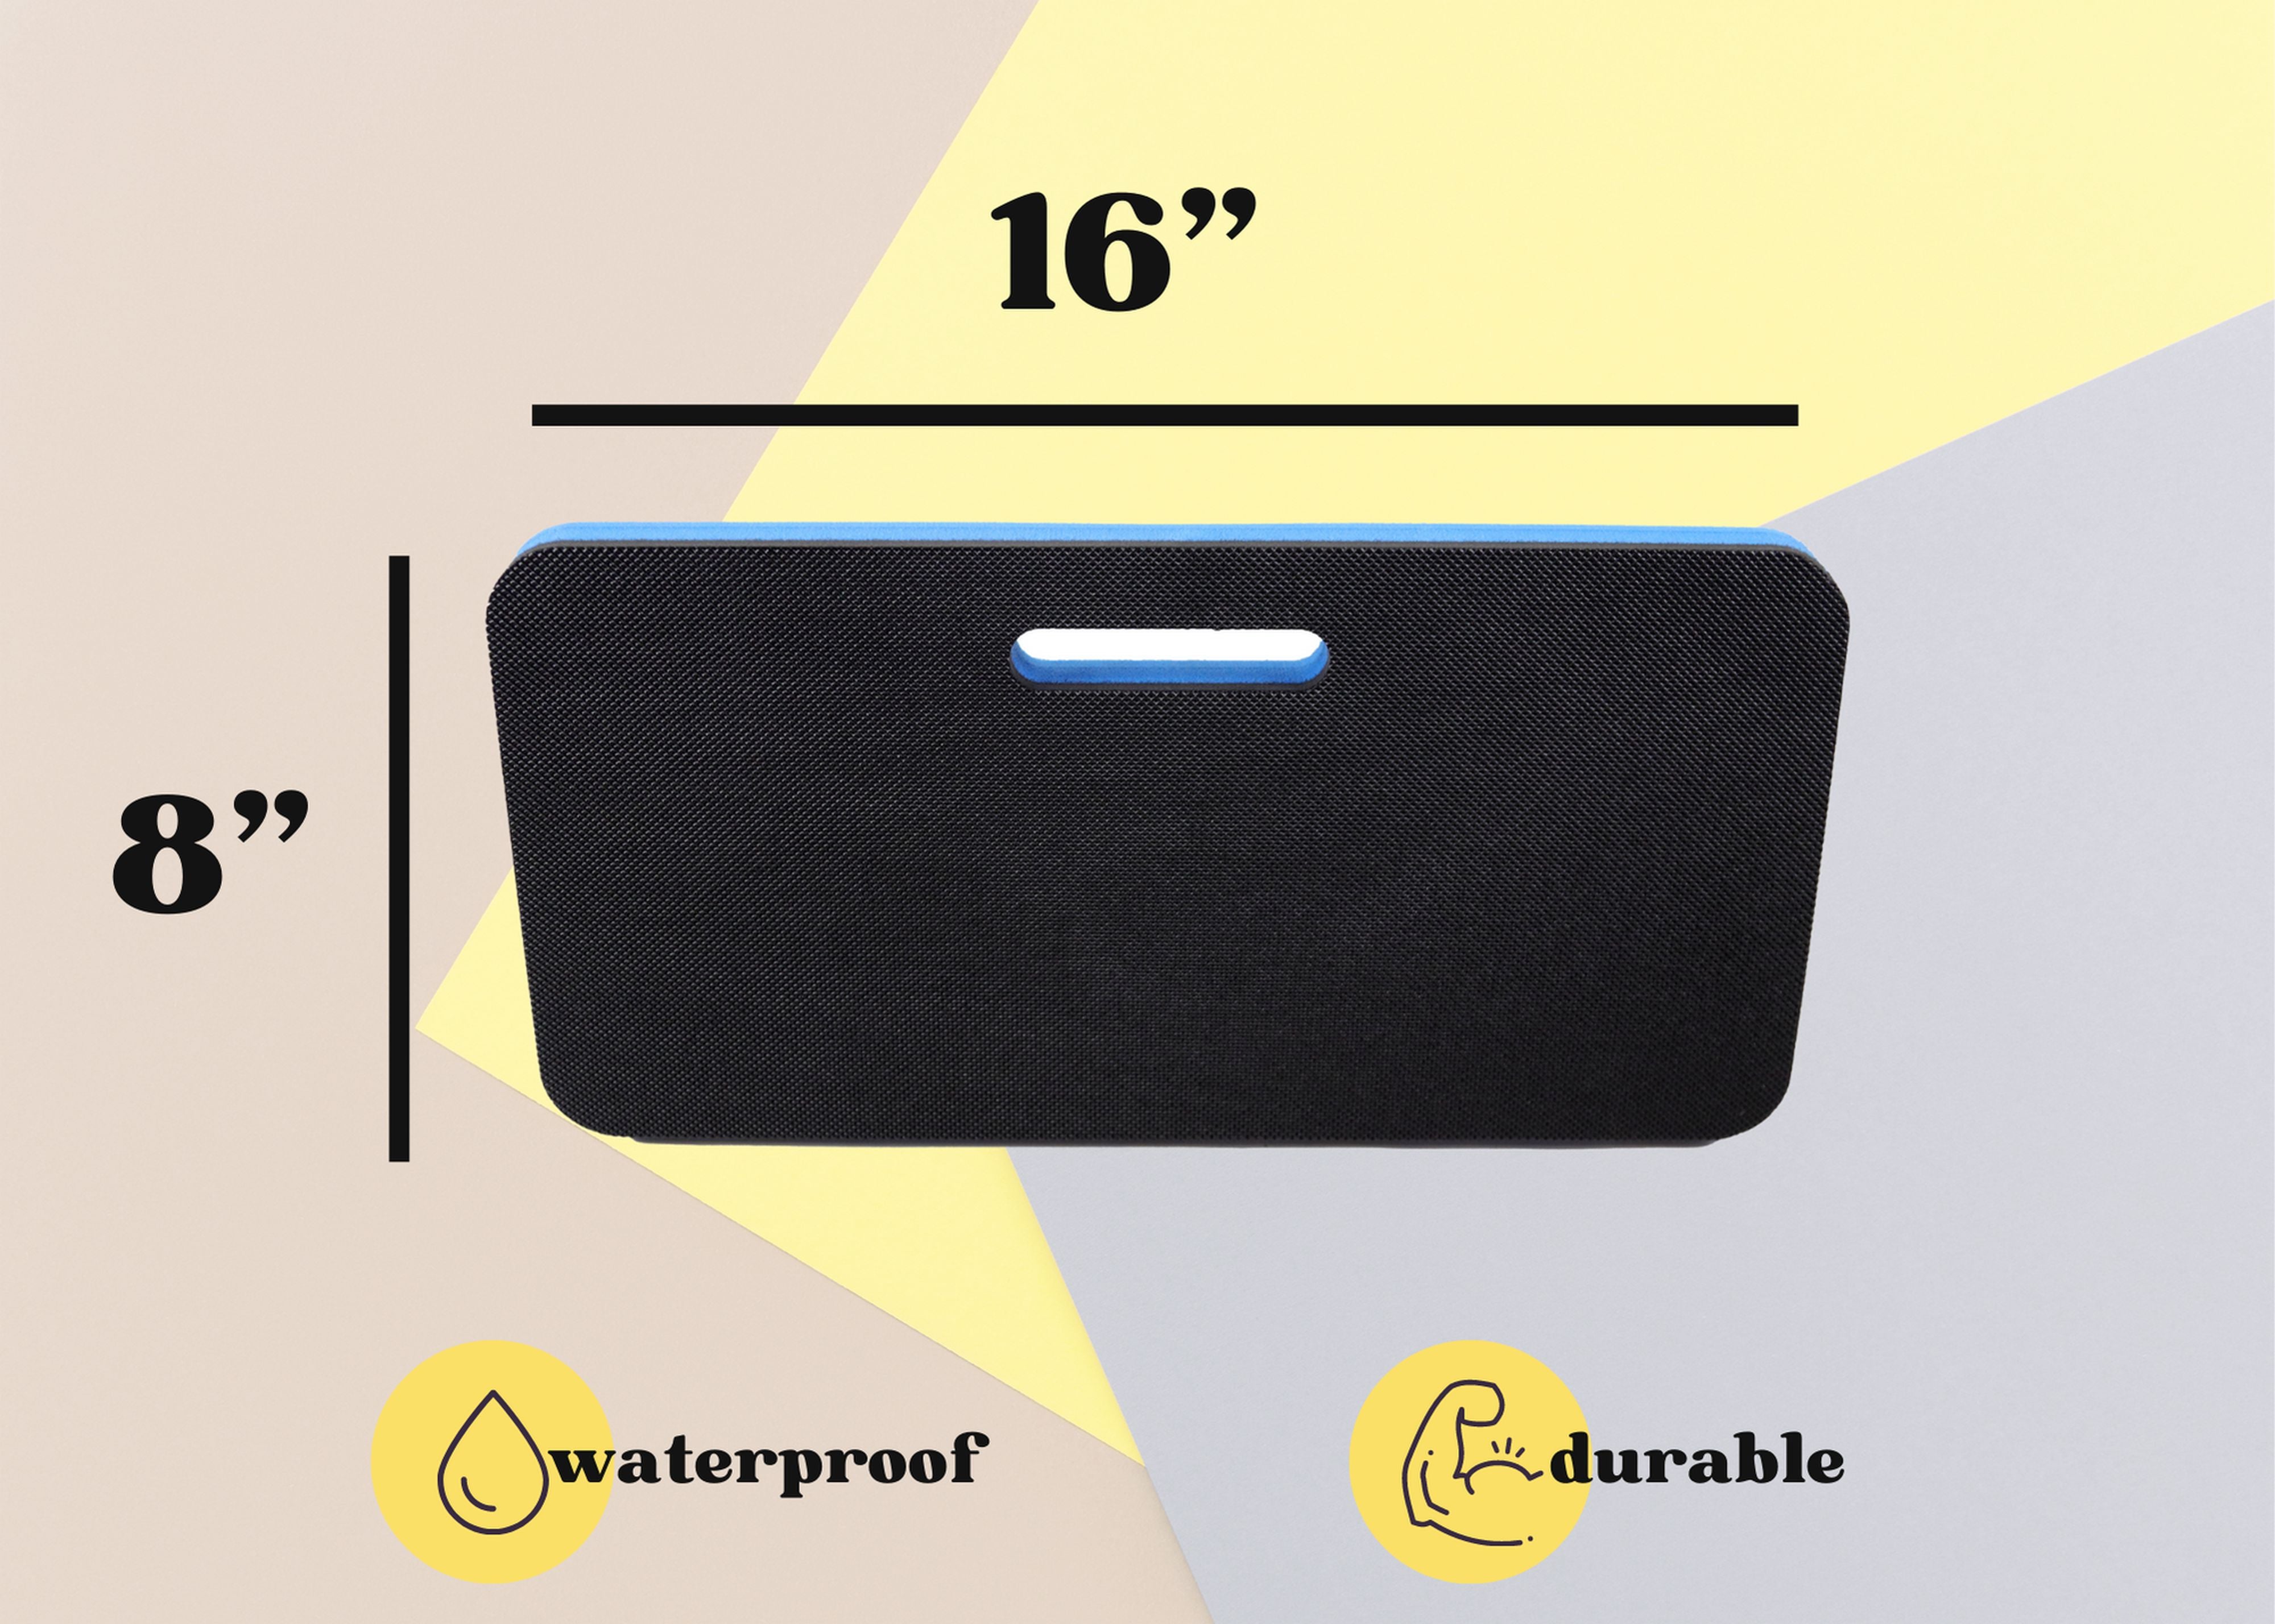 4 Portable Knee Cushions Blue and Black for Home Garden Work Automotive Workshop and More Durable Thick Comfortable High Density Waterproof Foam 16 x 8 Inches Kneeling Pad